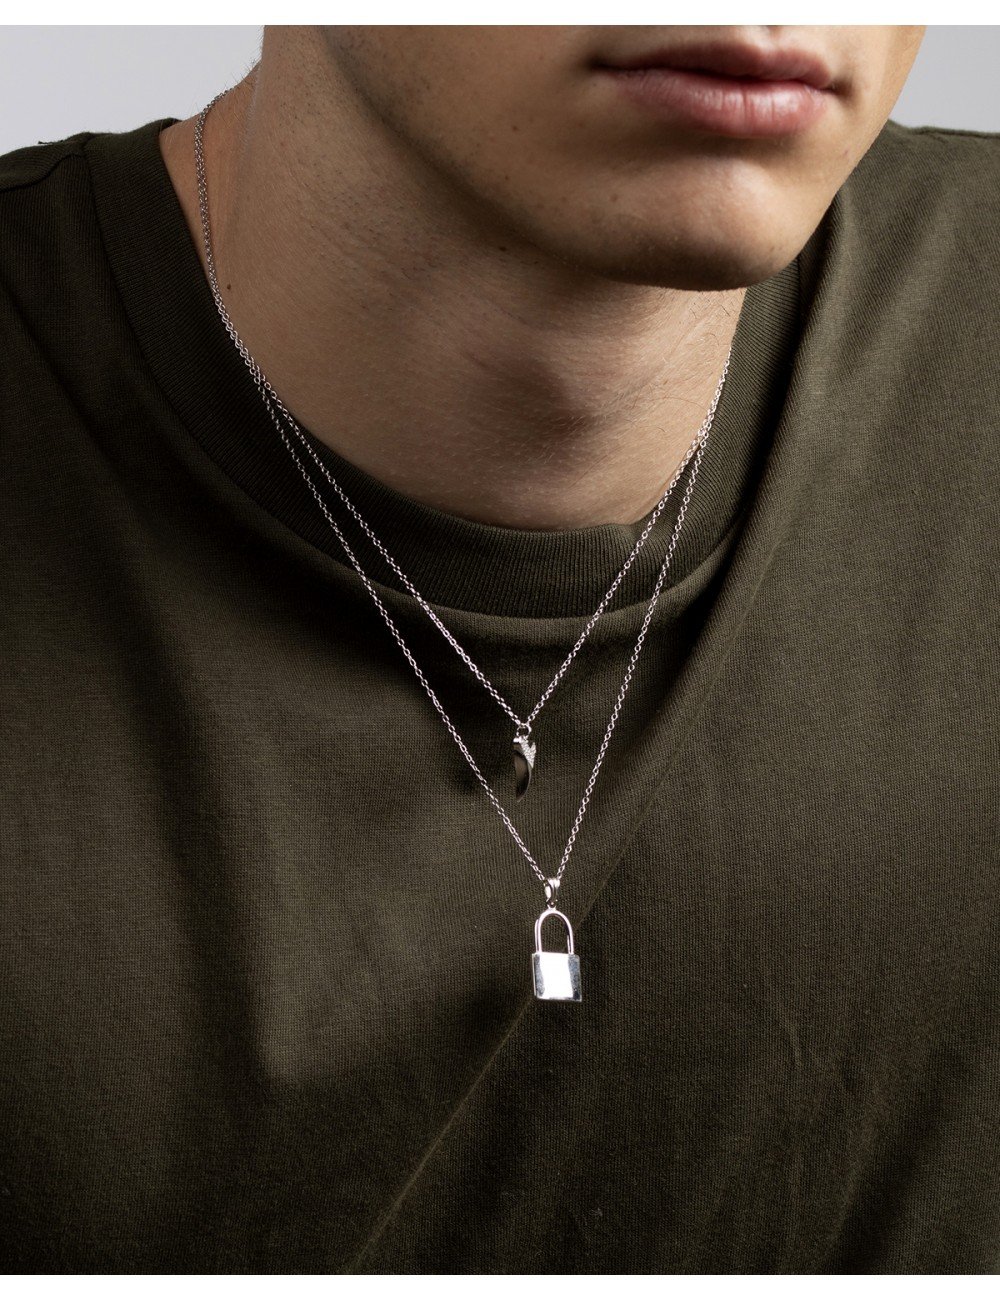 padlock chain necklace mens